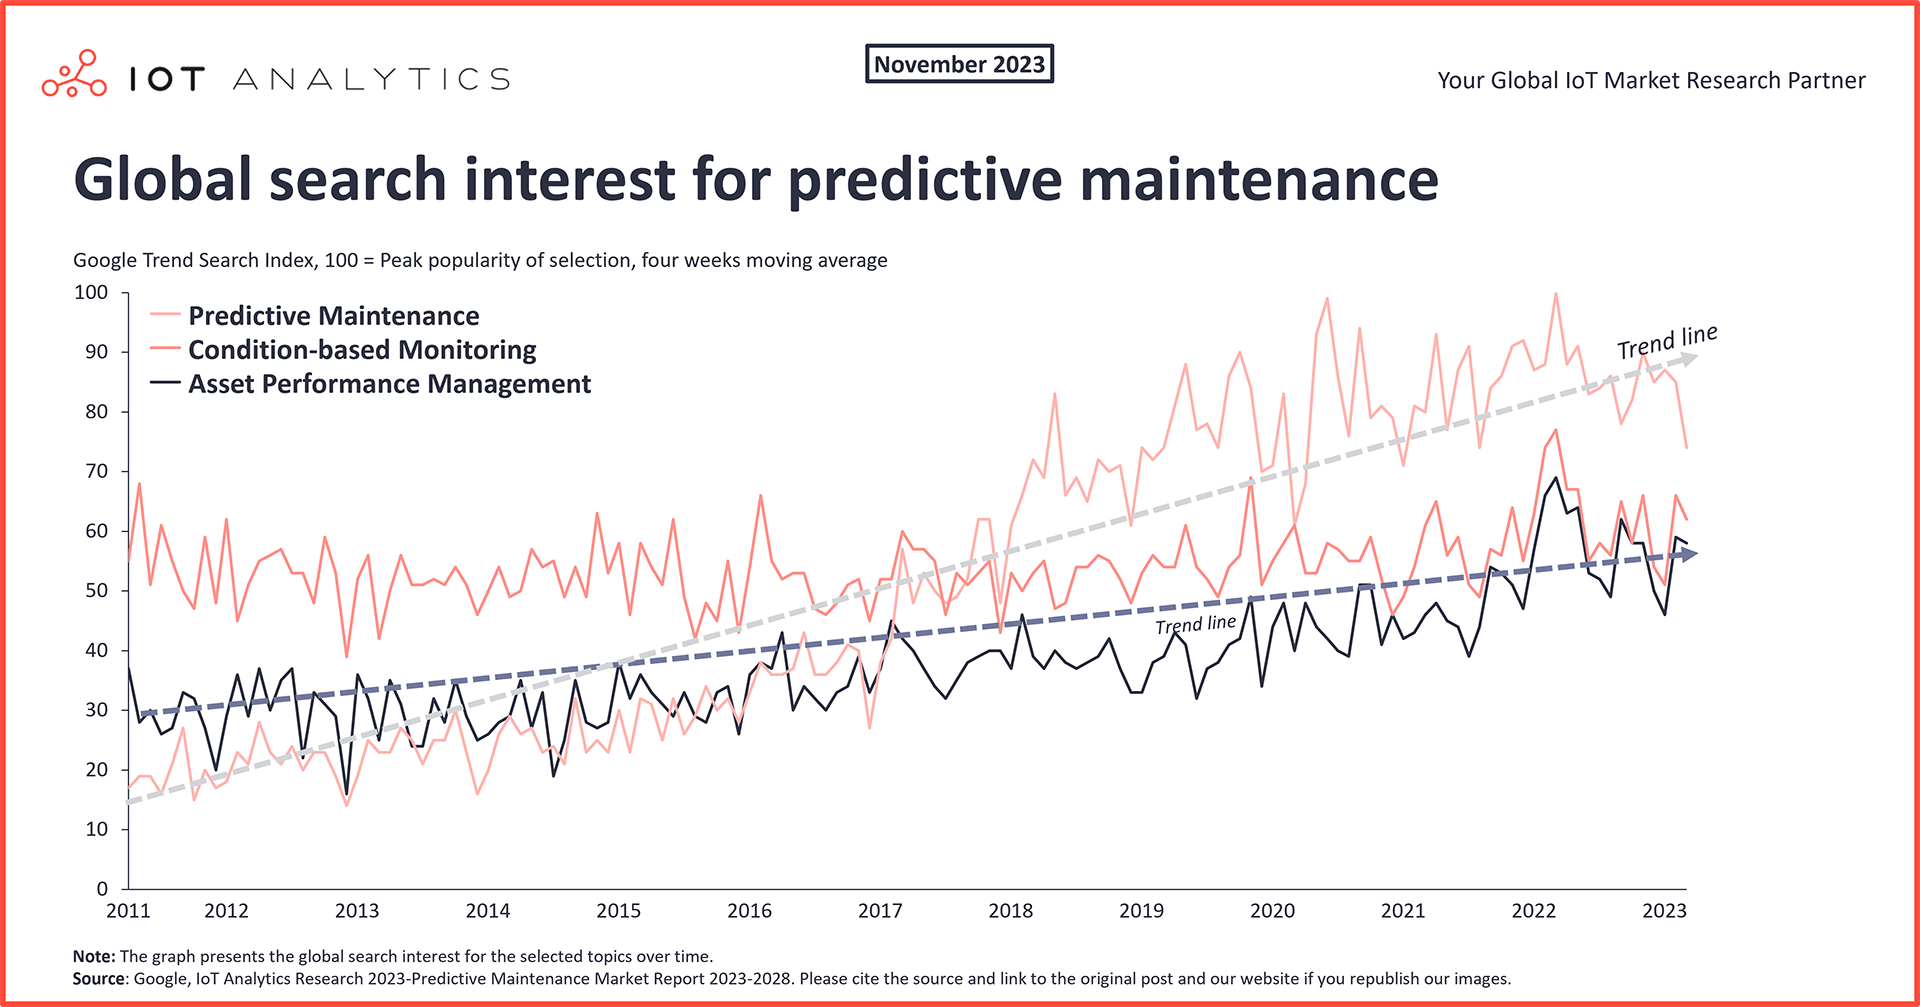 Global Search Interest for Predictive Maintenance